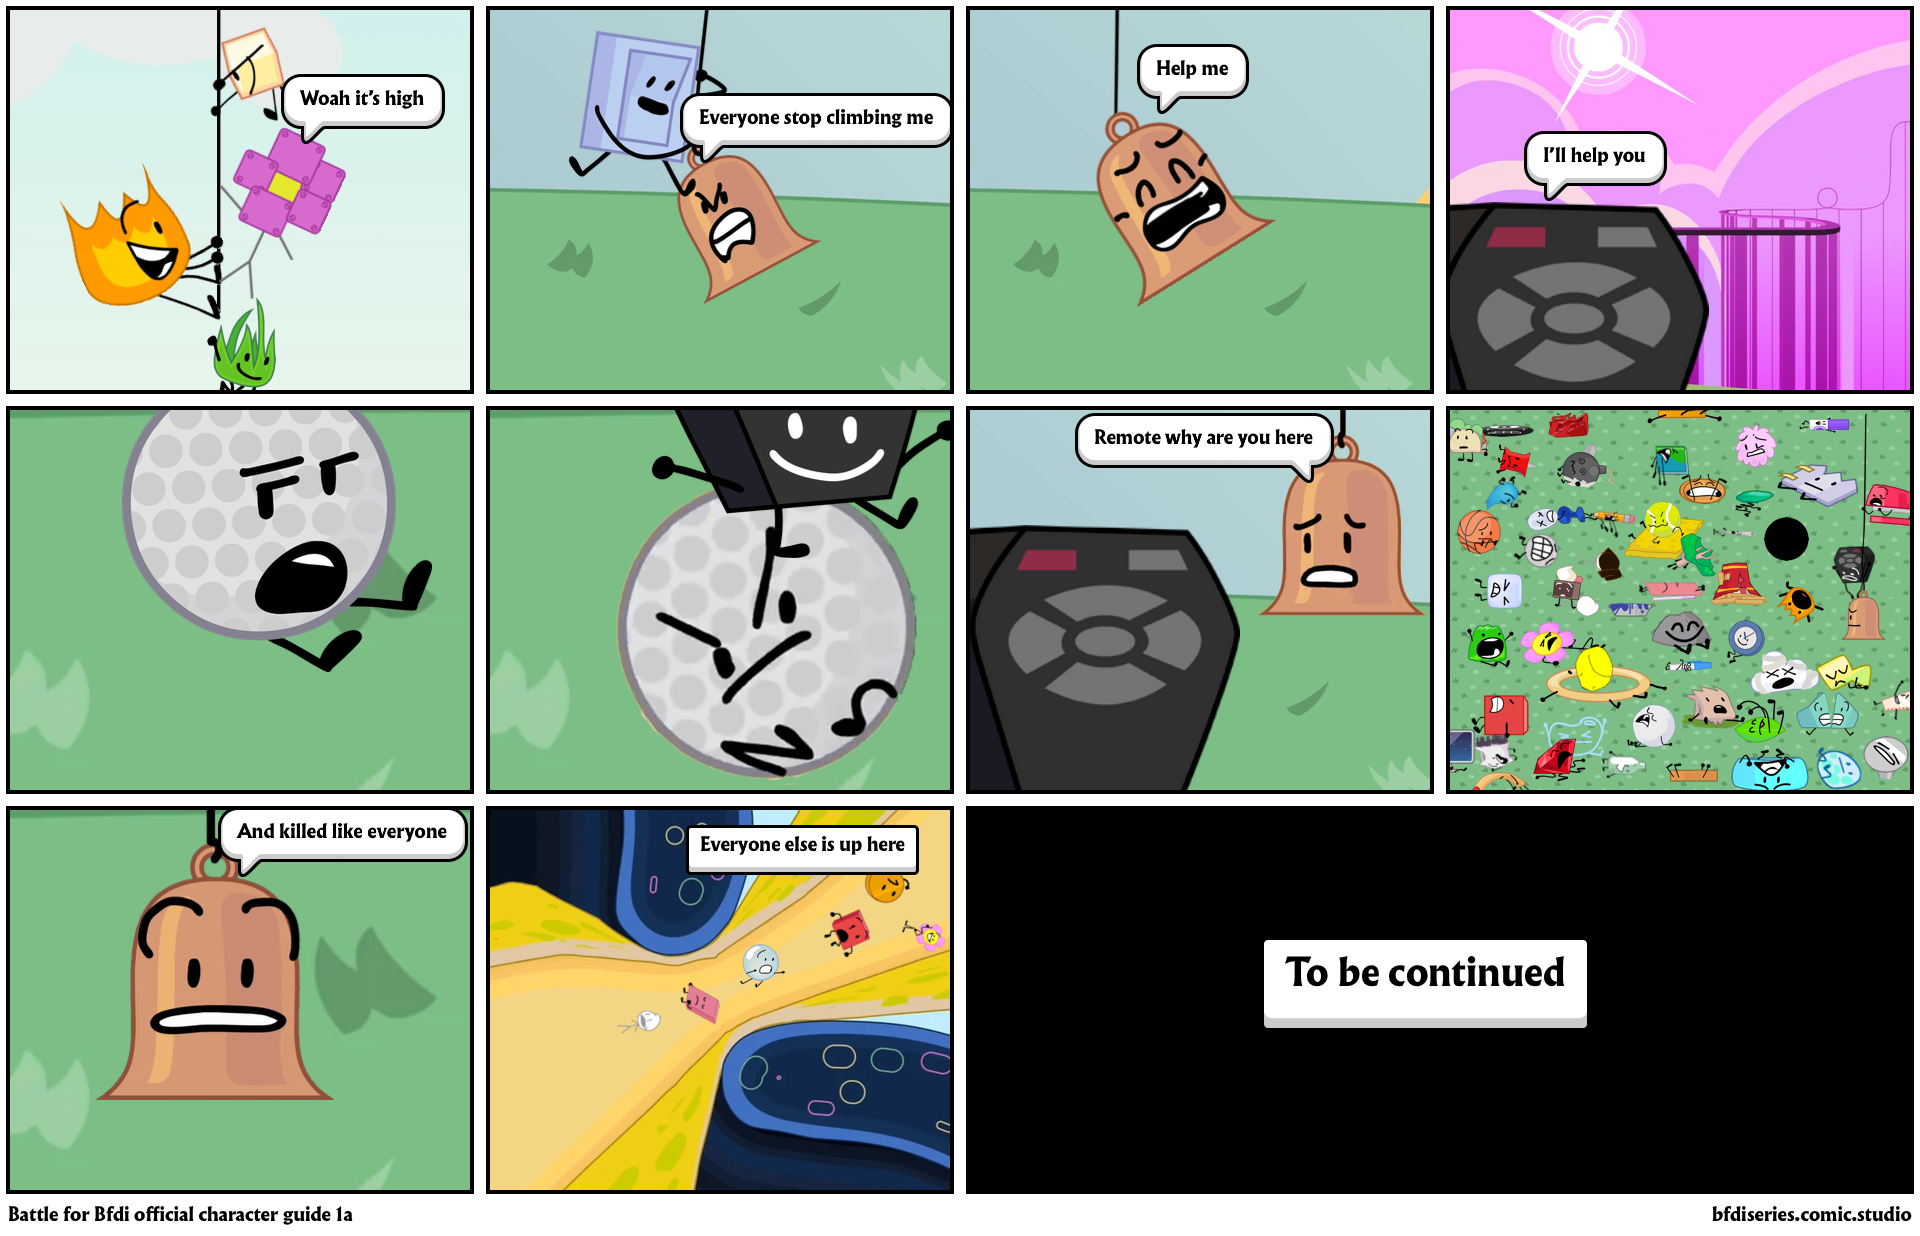 Battle for Bfdi official character guide 1a